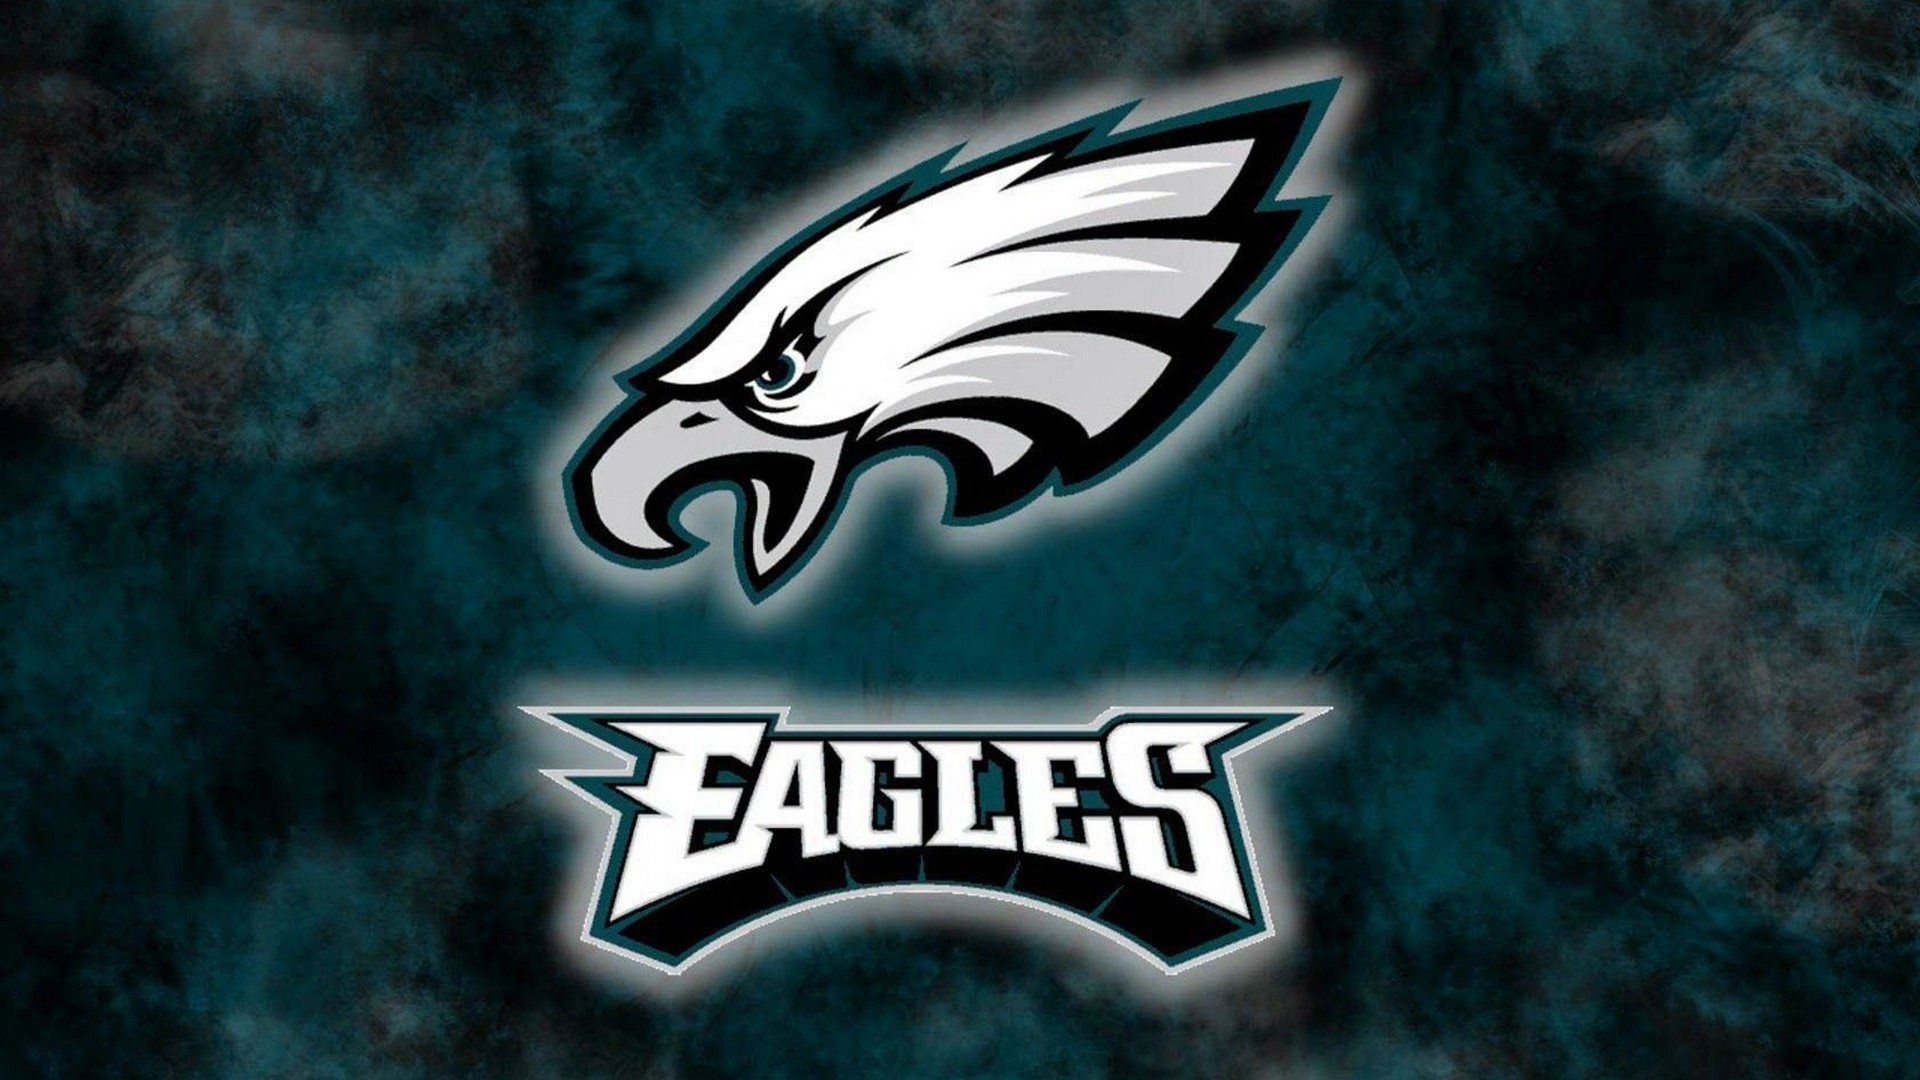 Phila Eagles Desktop Wallpaper with resolution 1920x1080 pixel. You can make this wallpaper for your Mac or Windows Desktop Background, iPhone, Android or Tablet and another Smartphone device